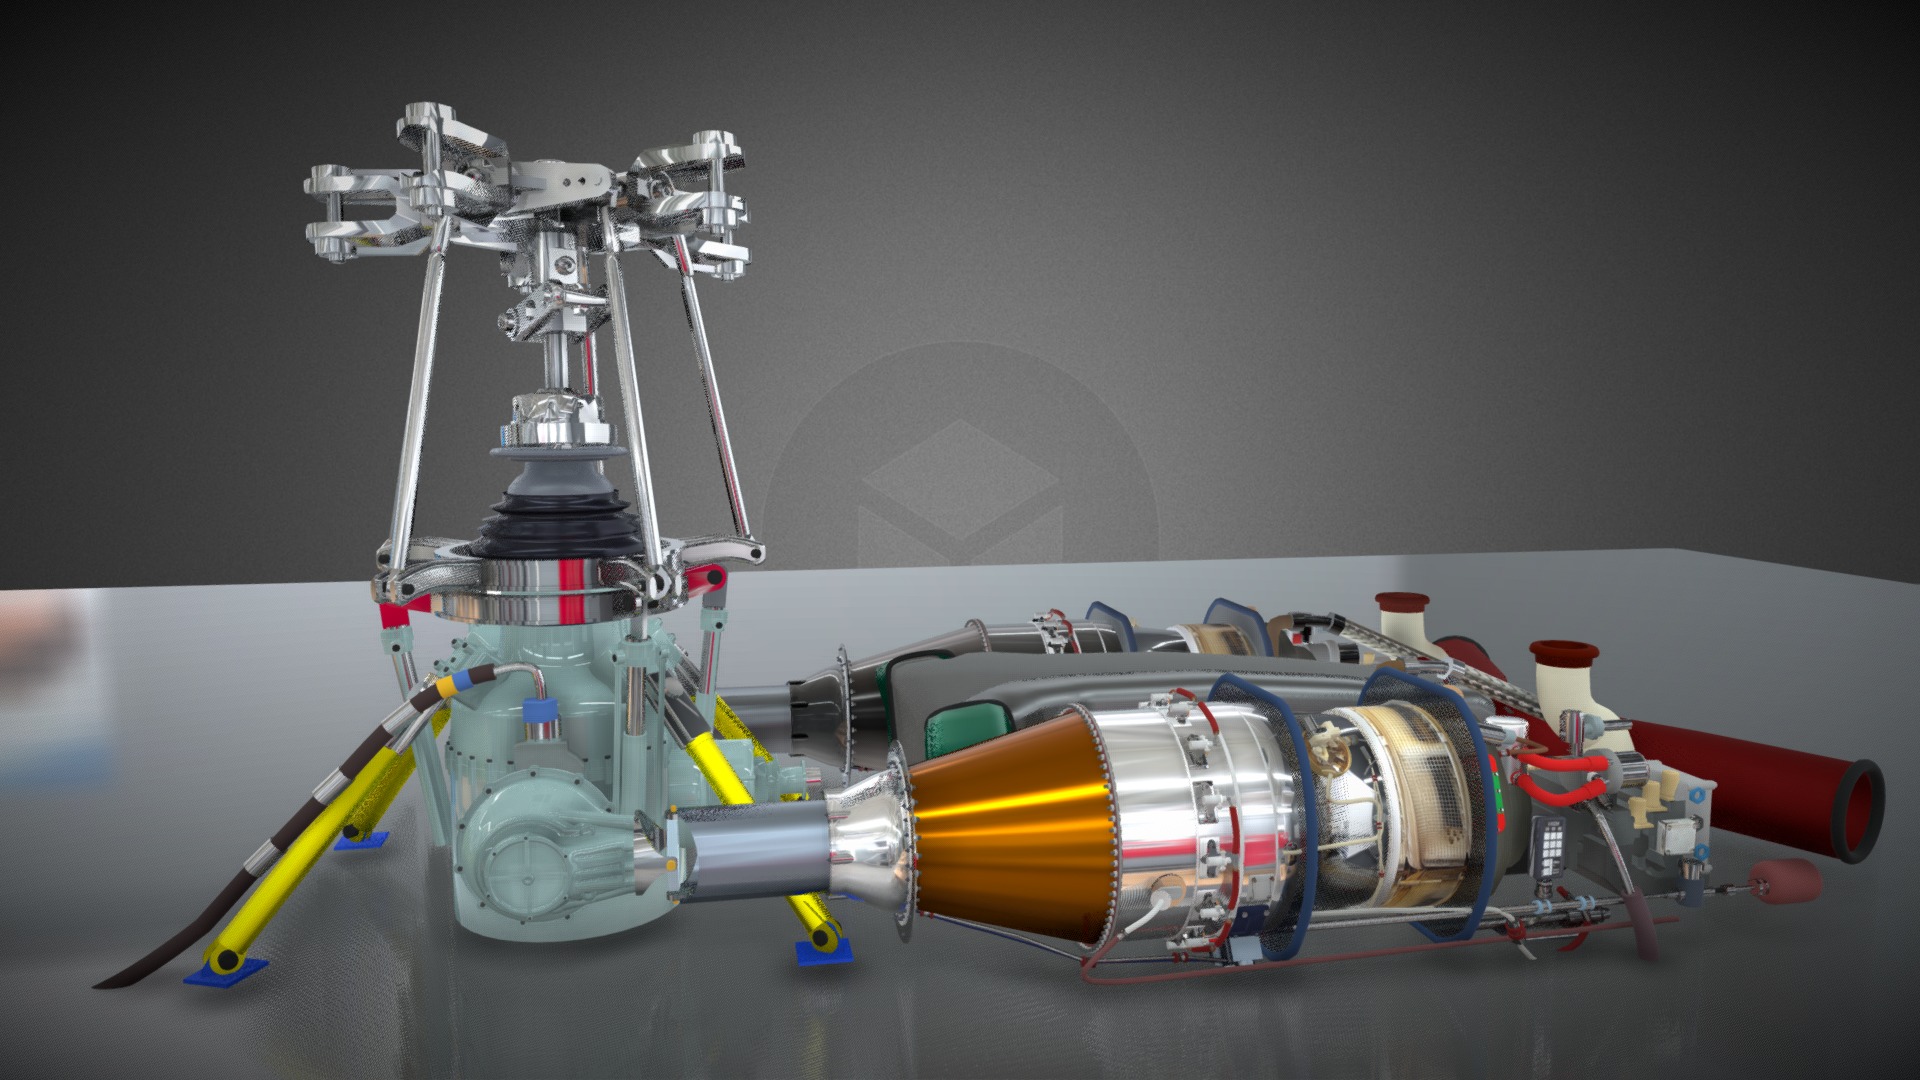 AW139 Engine and Rotor - 3D model by Interactive 3D Data (@proteinsimulation) 3d model